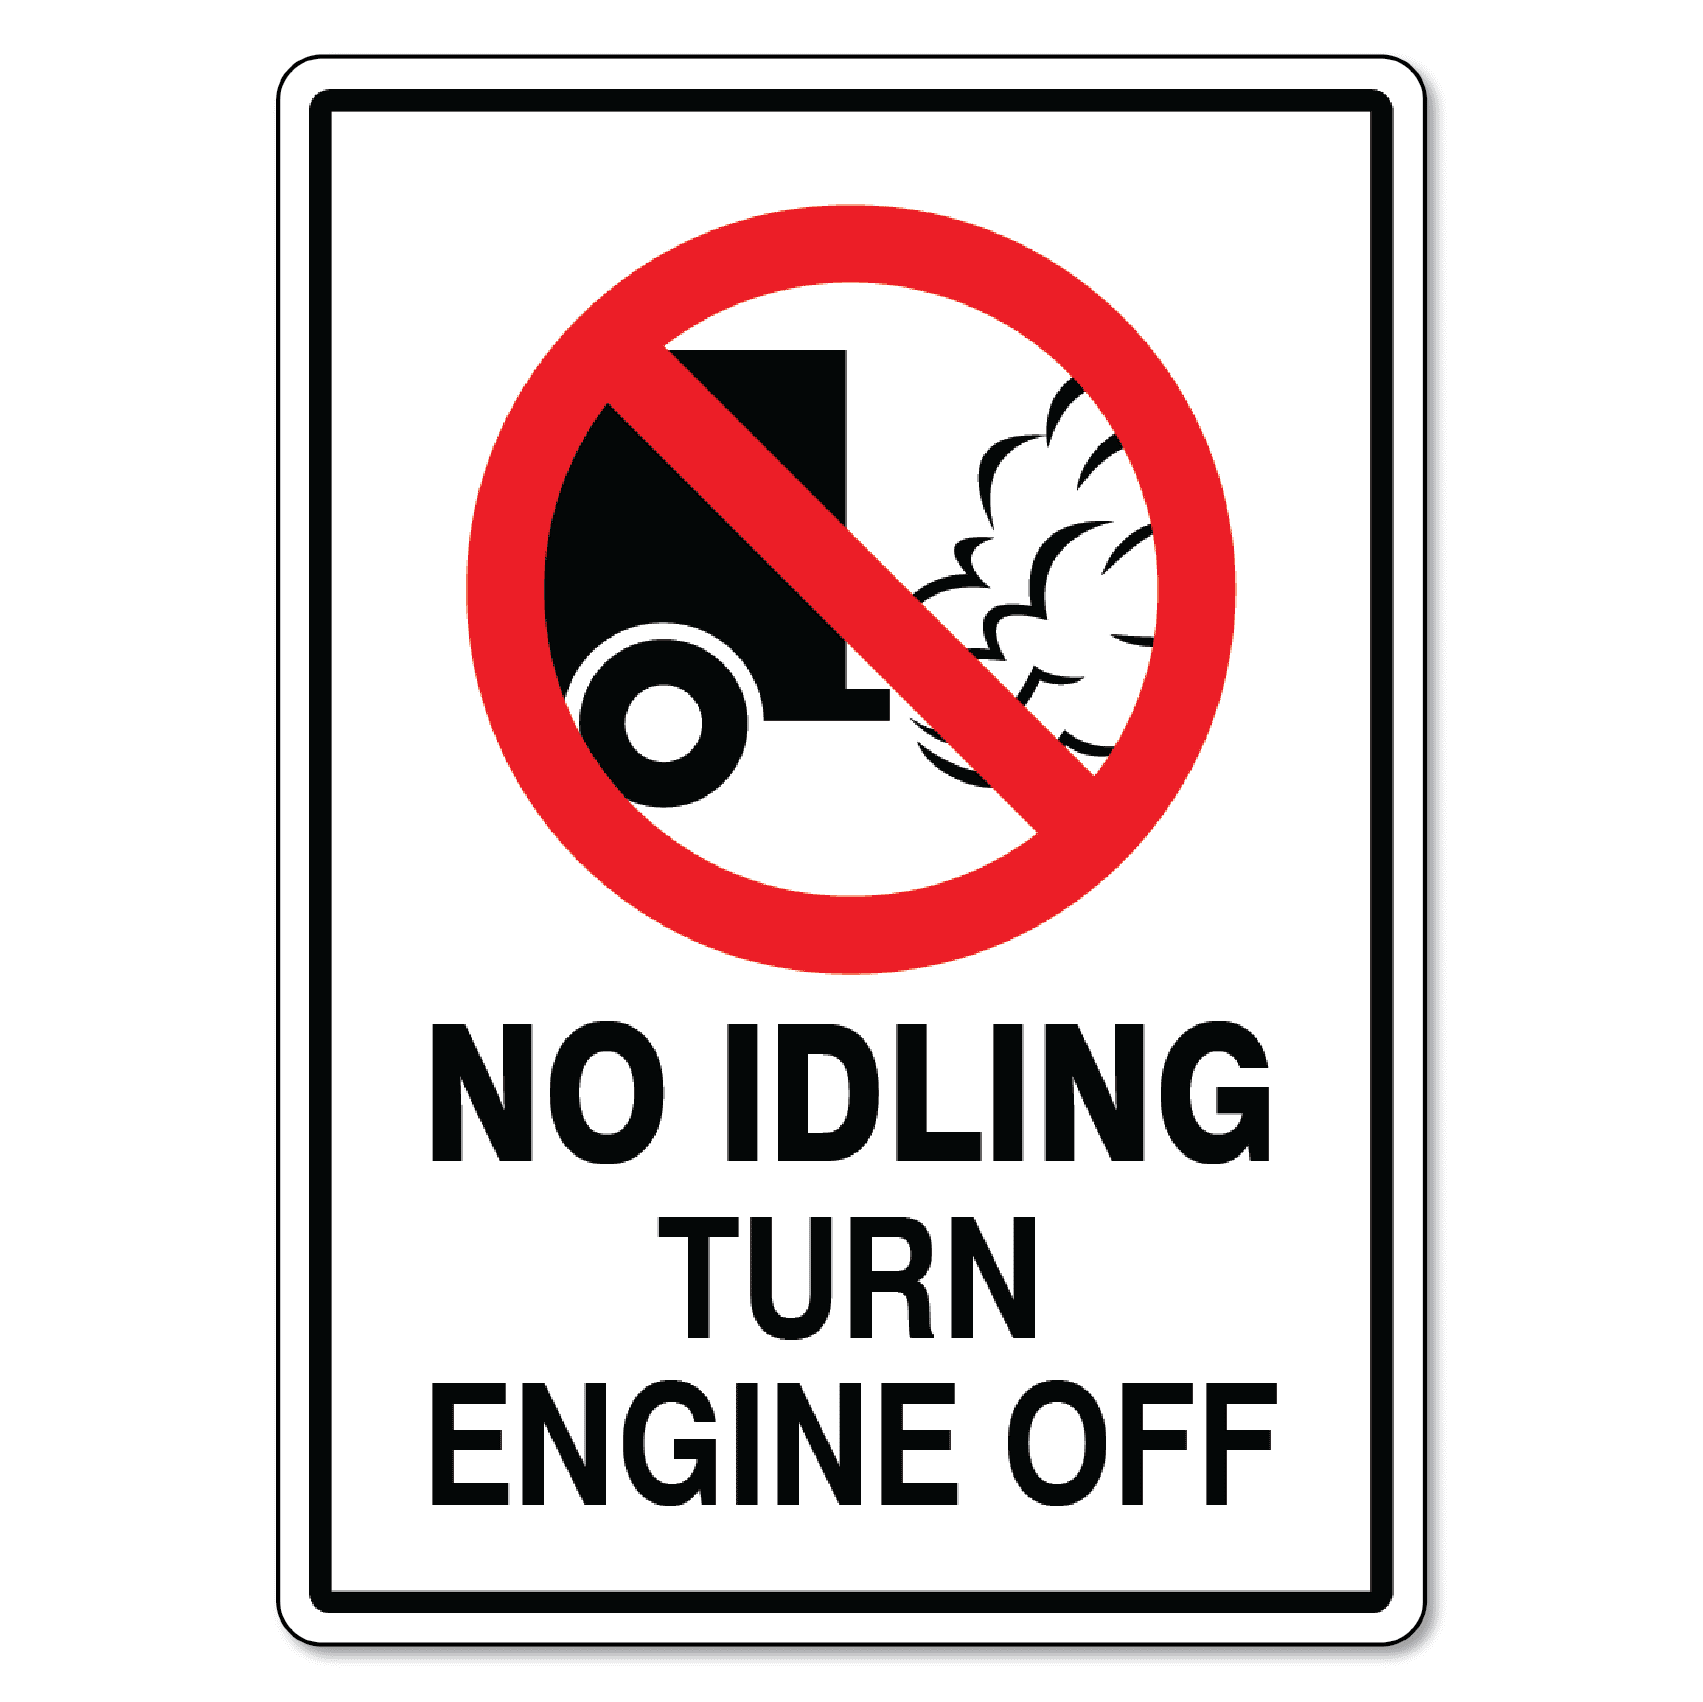 No Idling Turn Engine Off Sign - The Signmaker